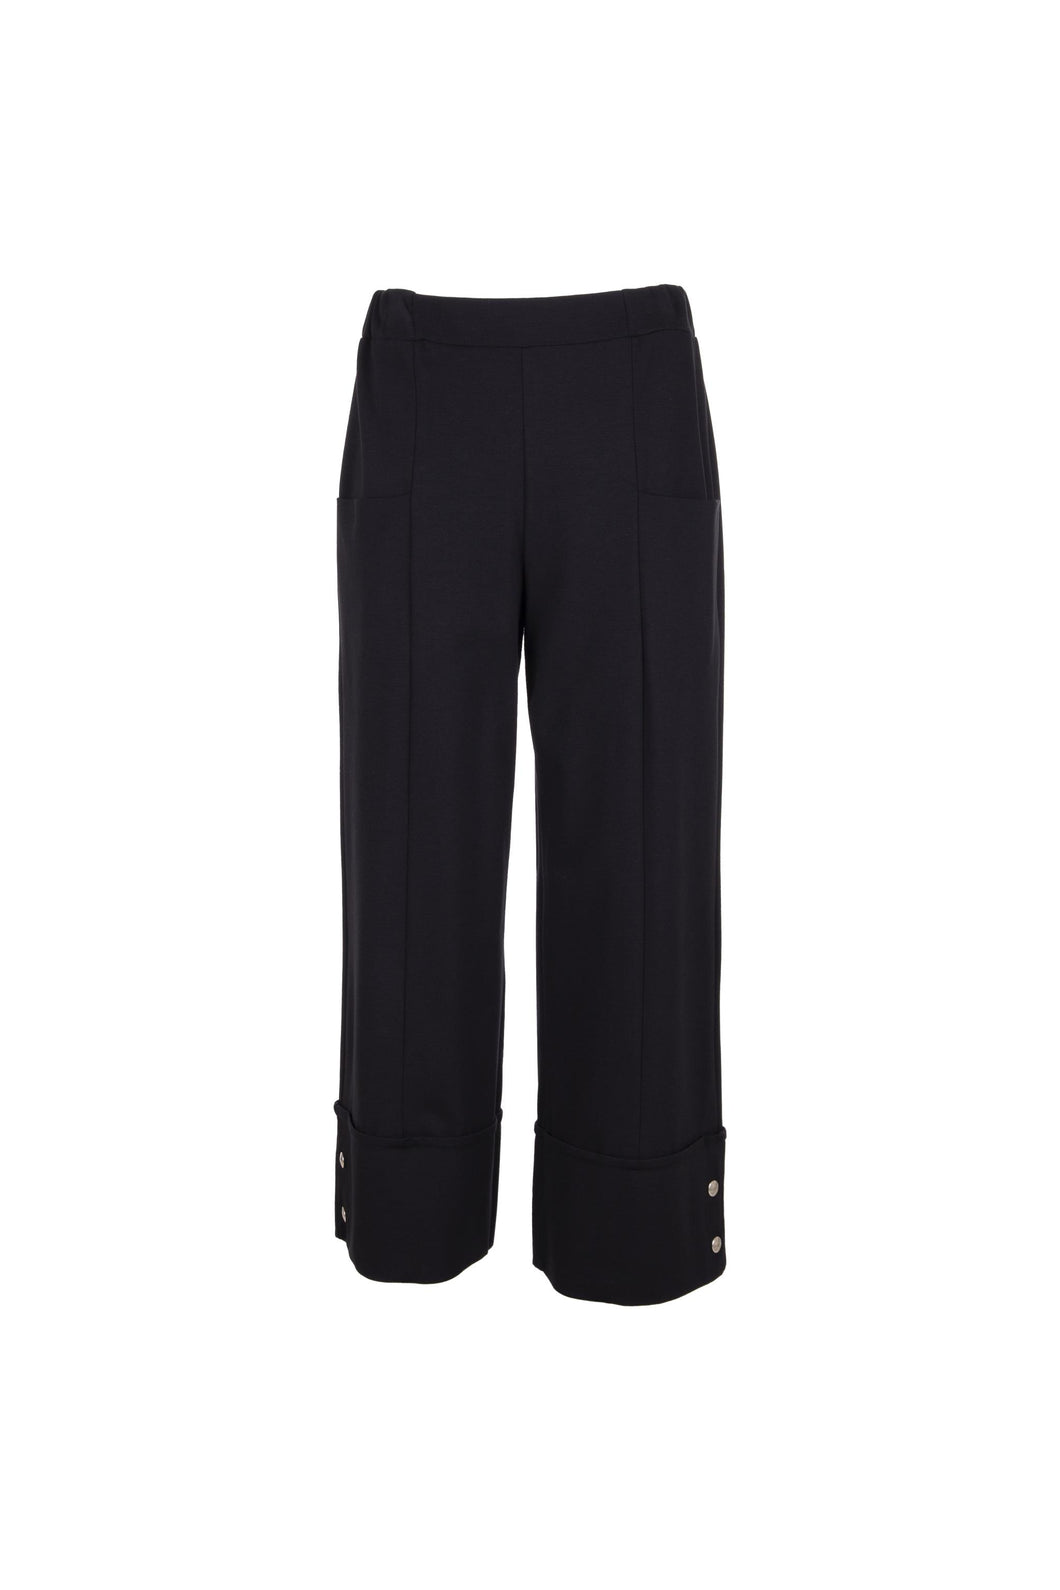 Peruzzi <BR>
Wide Leg Jersey Trousers with deep turn up and button detail <BR>
Black <BR>